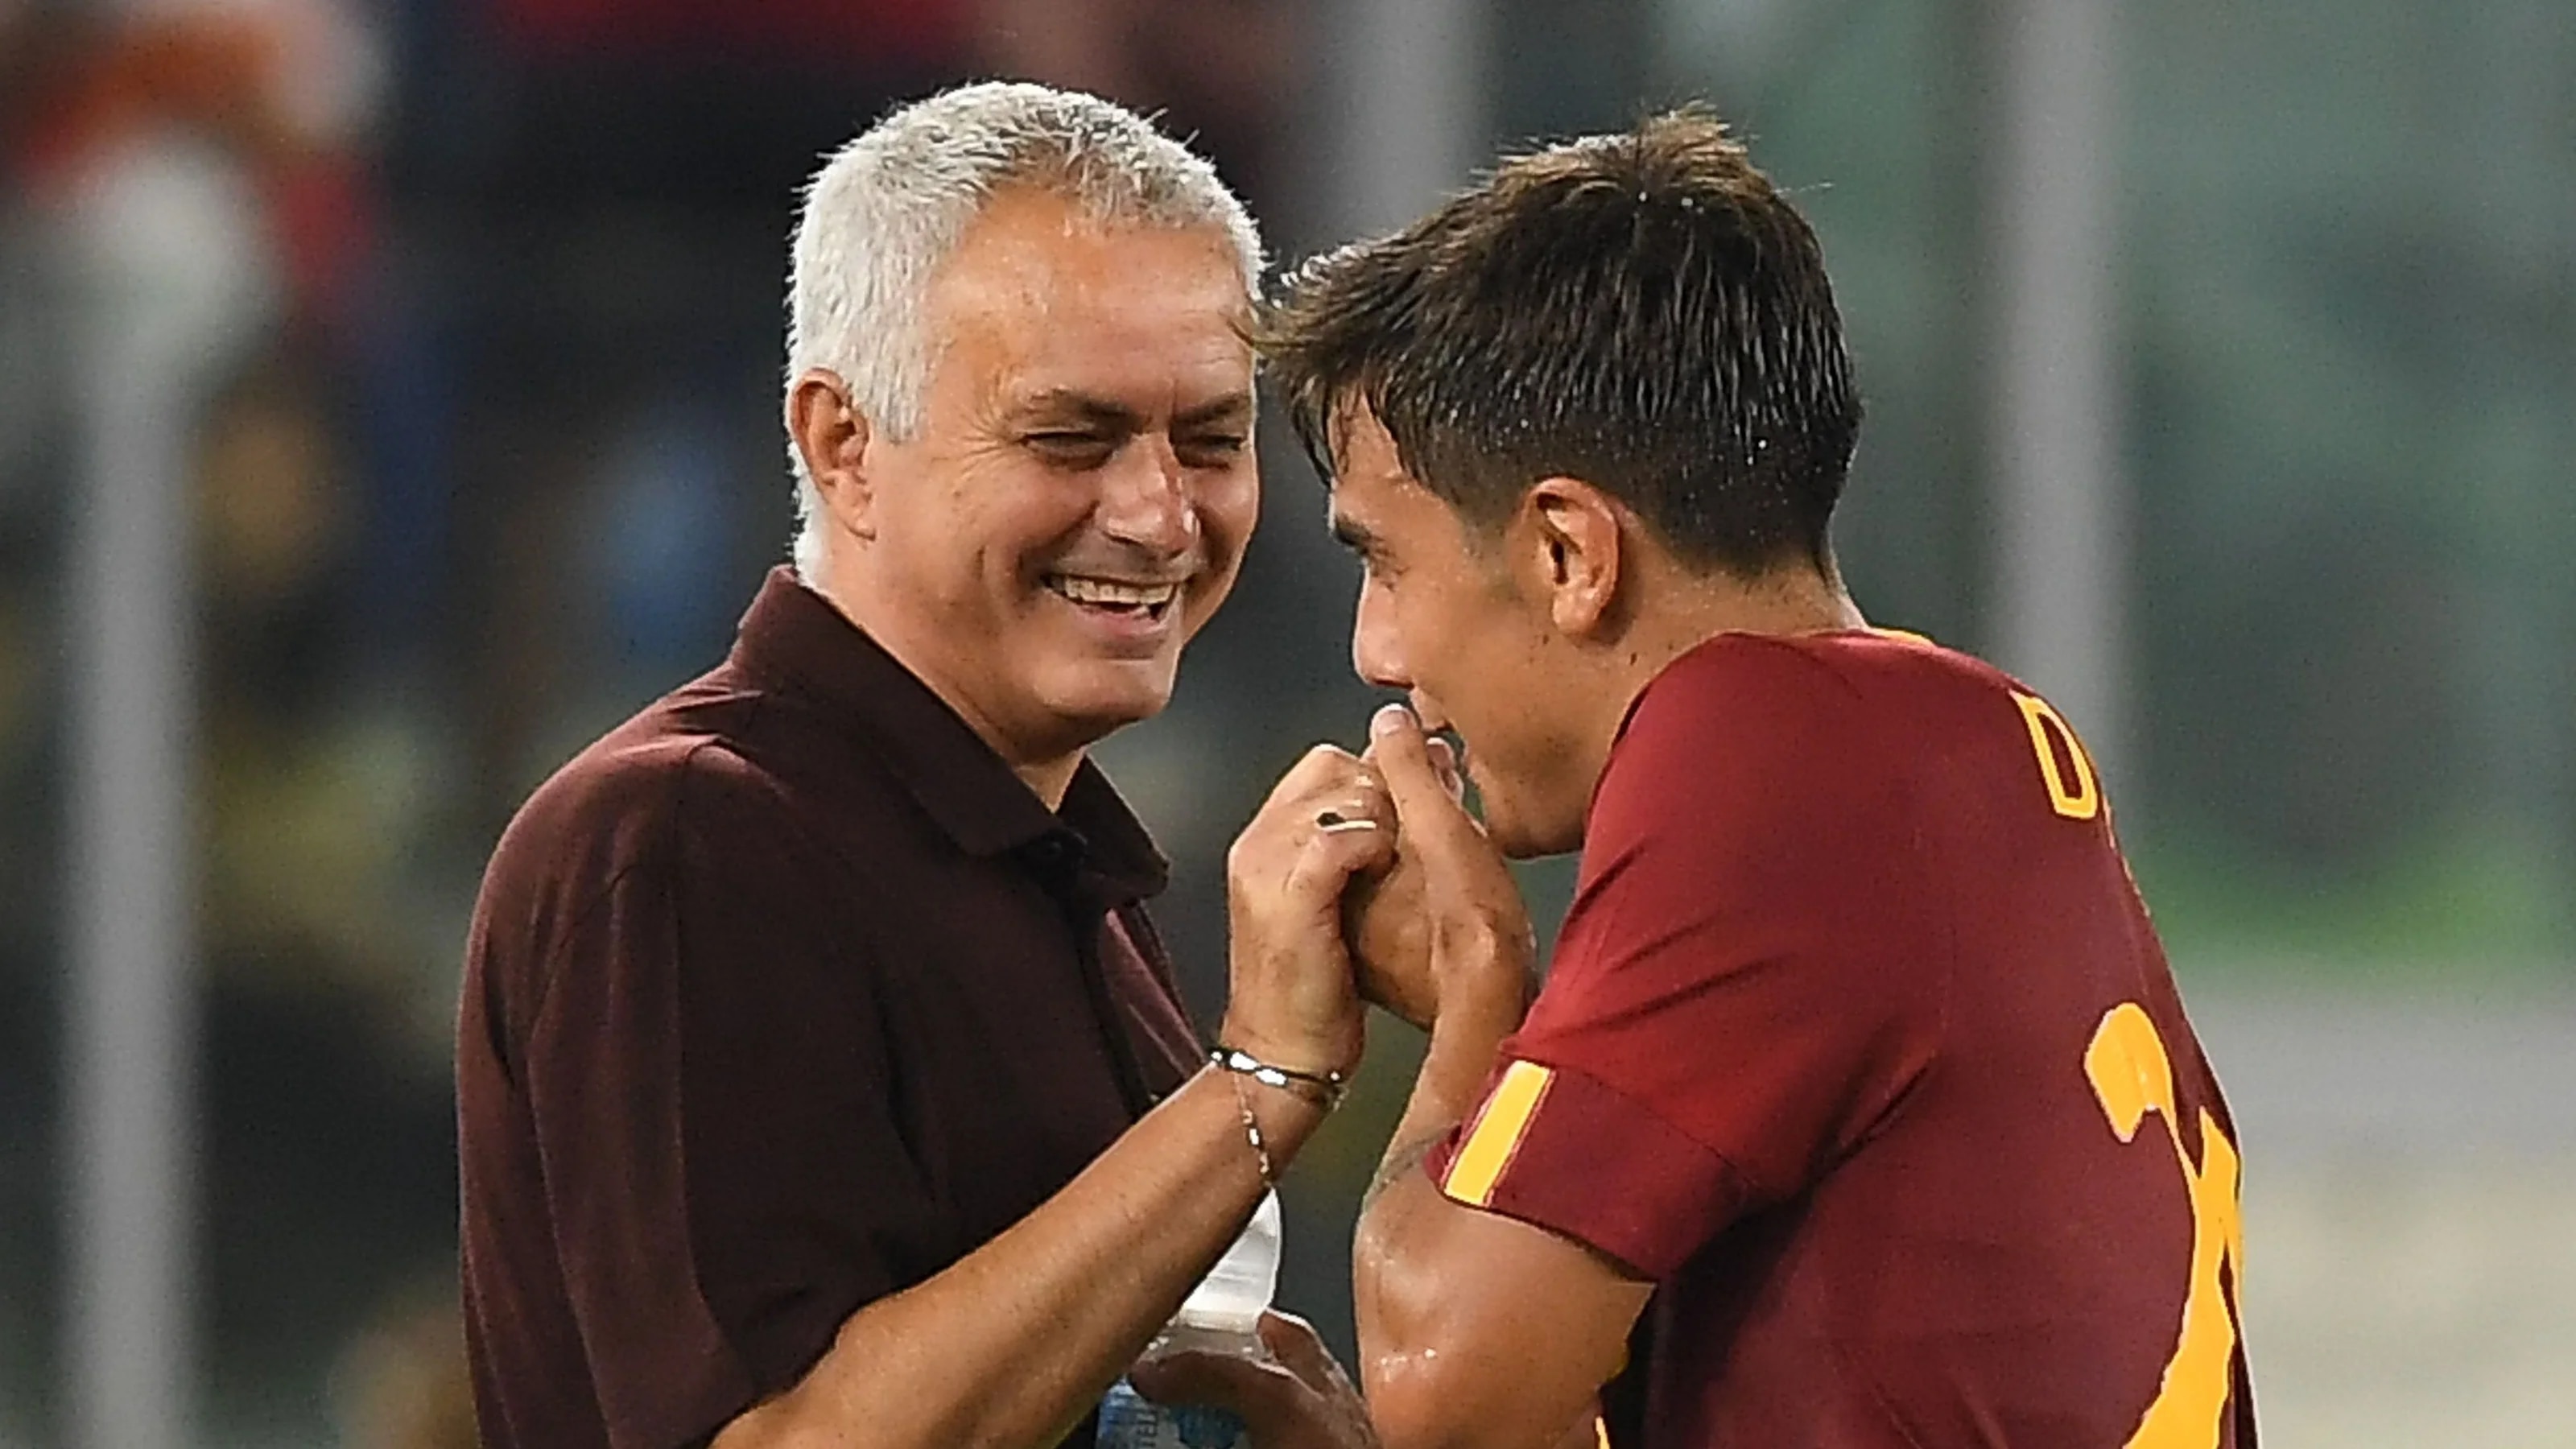 ROME, ITALY - AUGUST 30: Paulo Dybala of AS Roma greets Jose Mourinho head coach of AS Roma and kisses his hand during the Serie A match between AS Roma and AC Monza at Stadio Olimpico on August 30, 2022 in Rome, Italy.  (Photo by Silvia Lore/Getty Images)